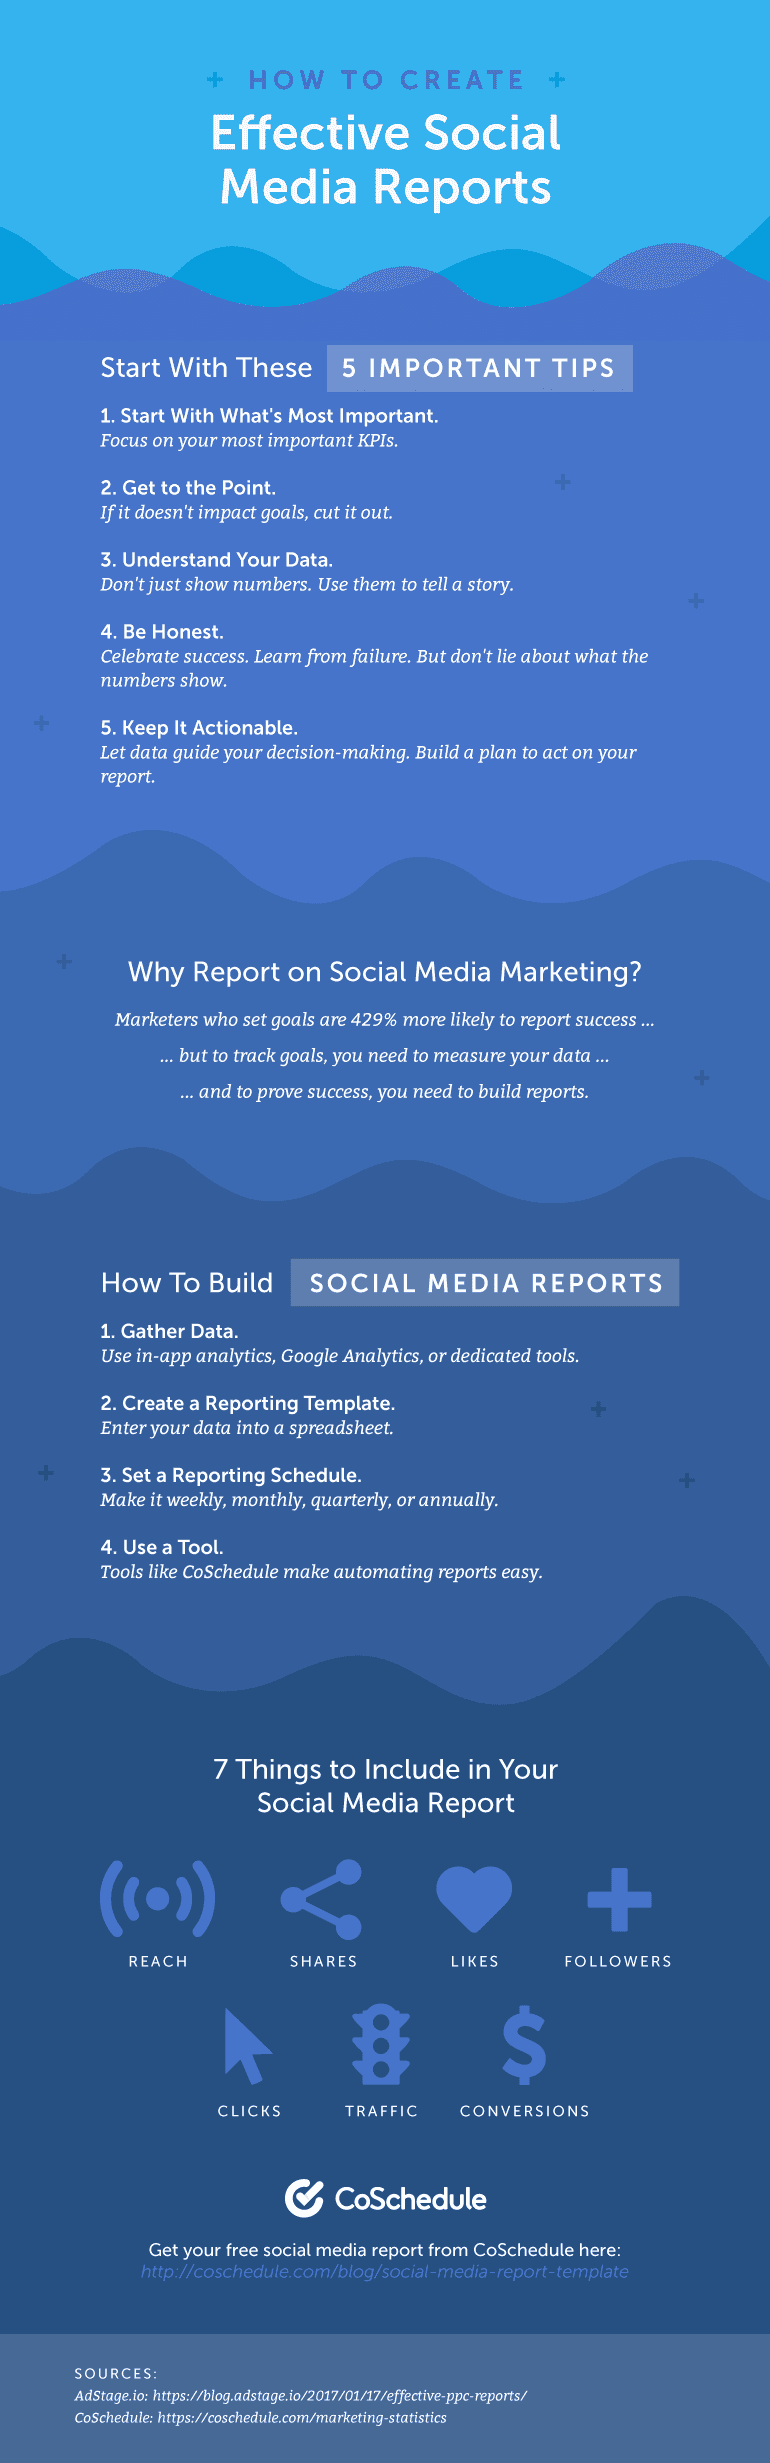 How to Create Effective Social Media Reports